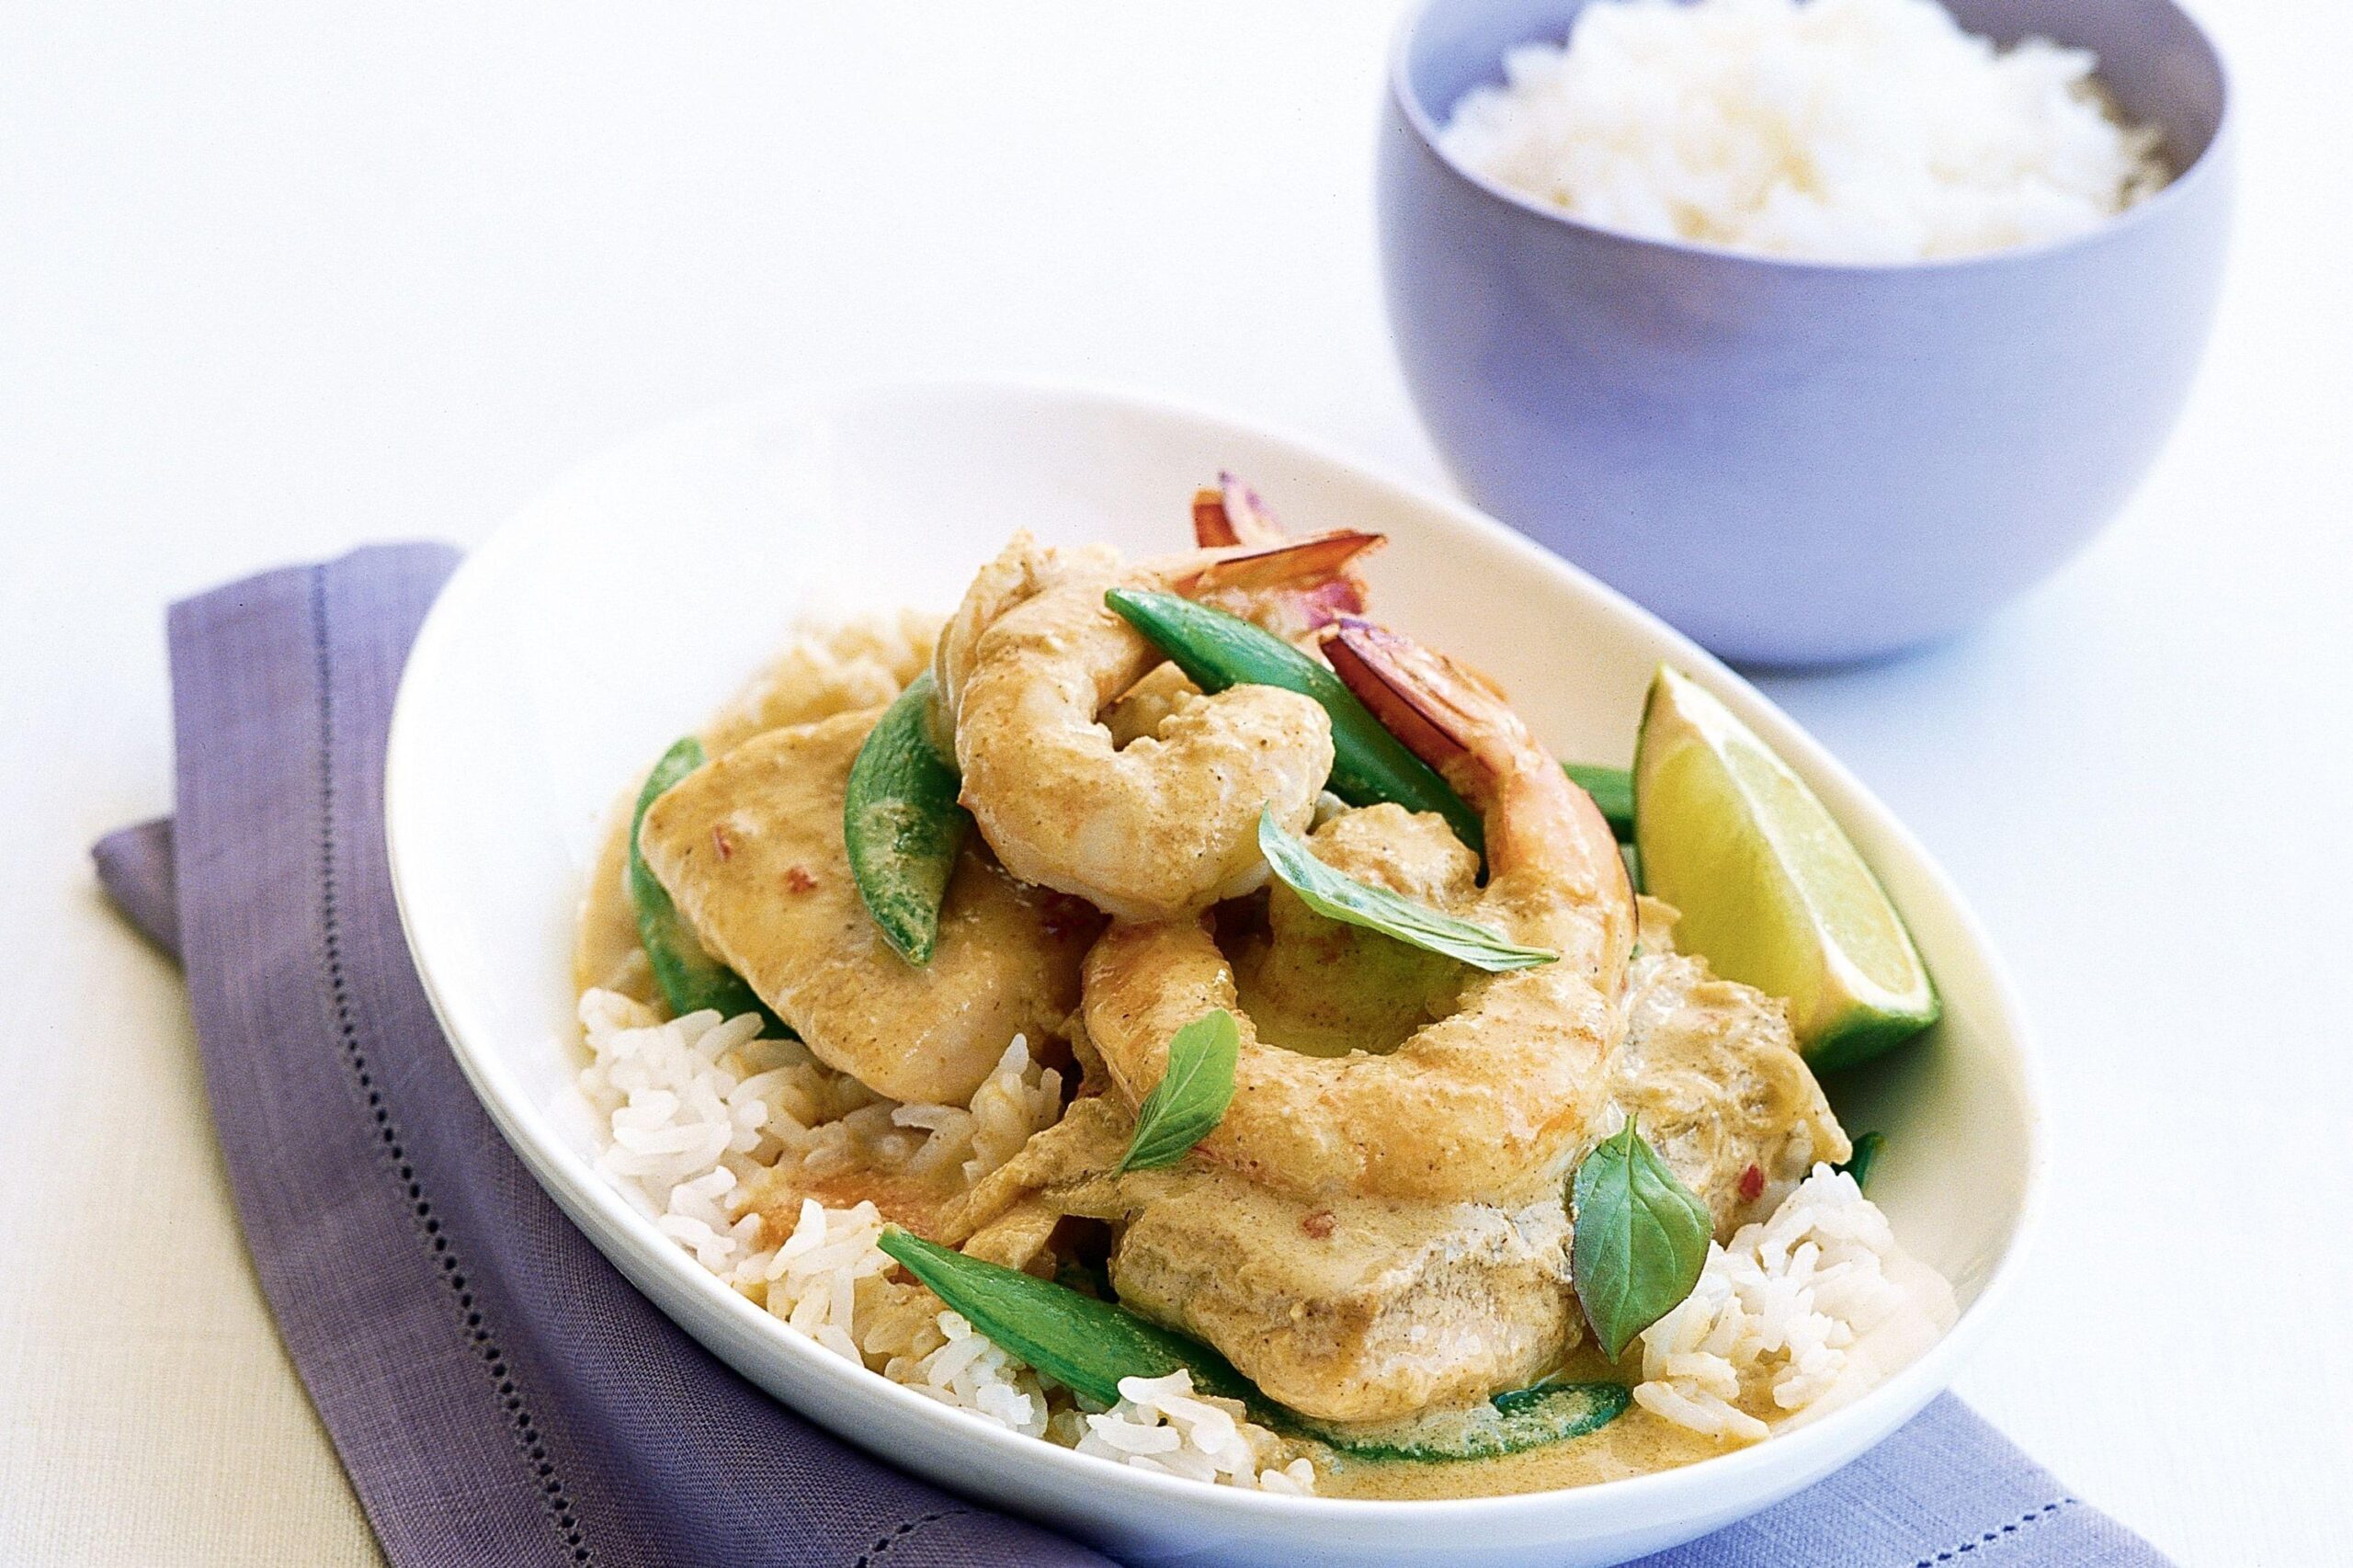  This bowl of curry is a seafood lover's heaven!